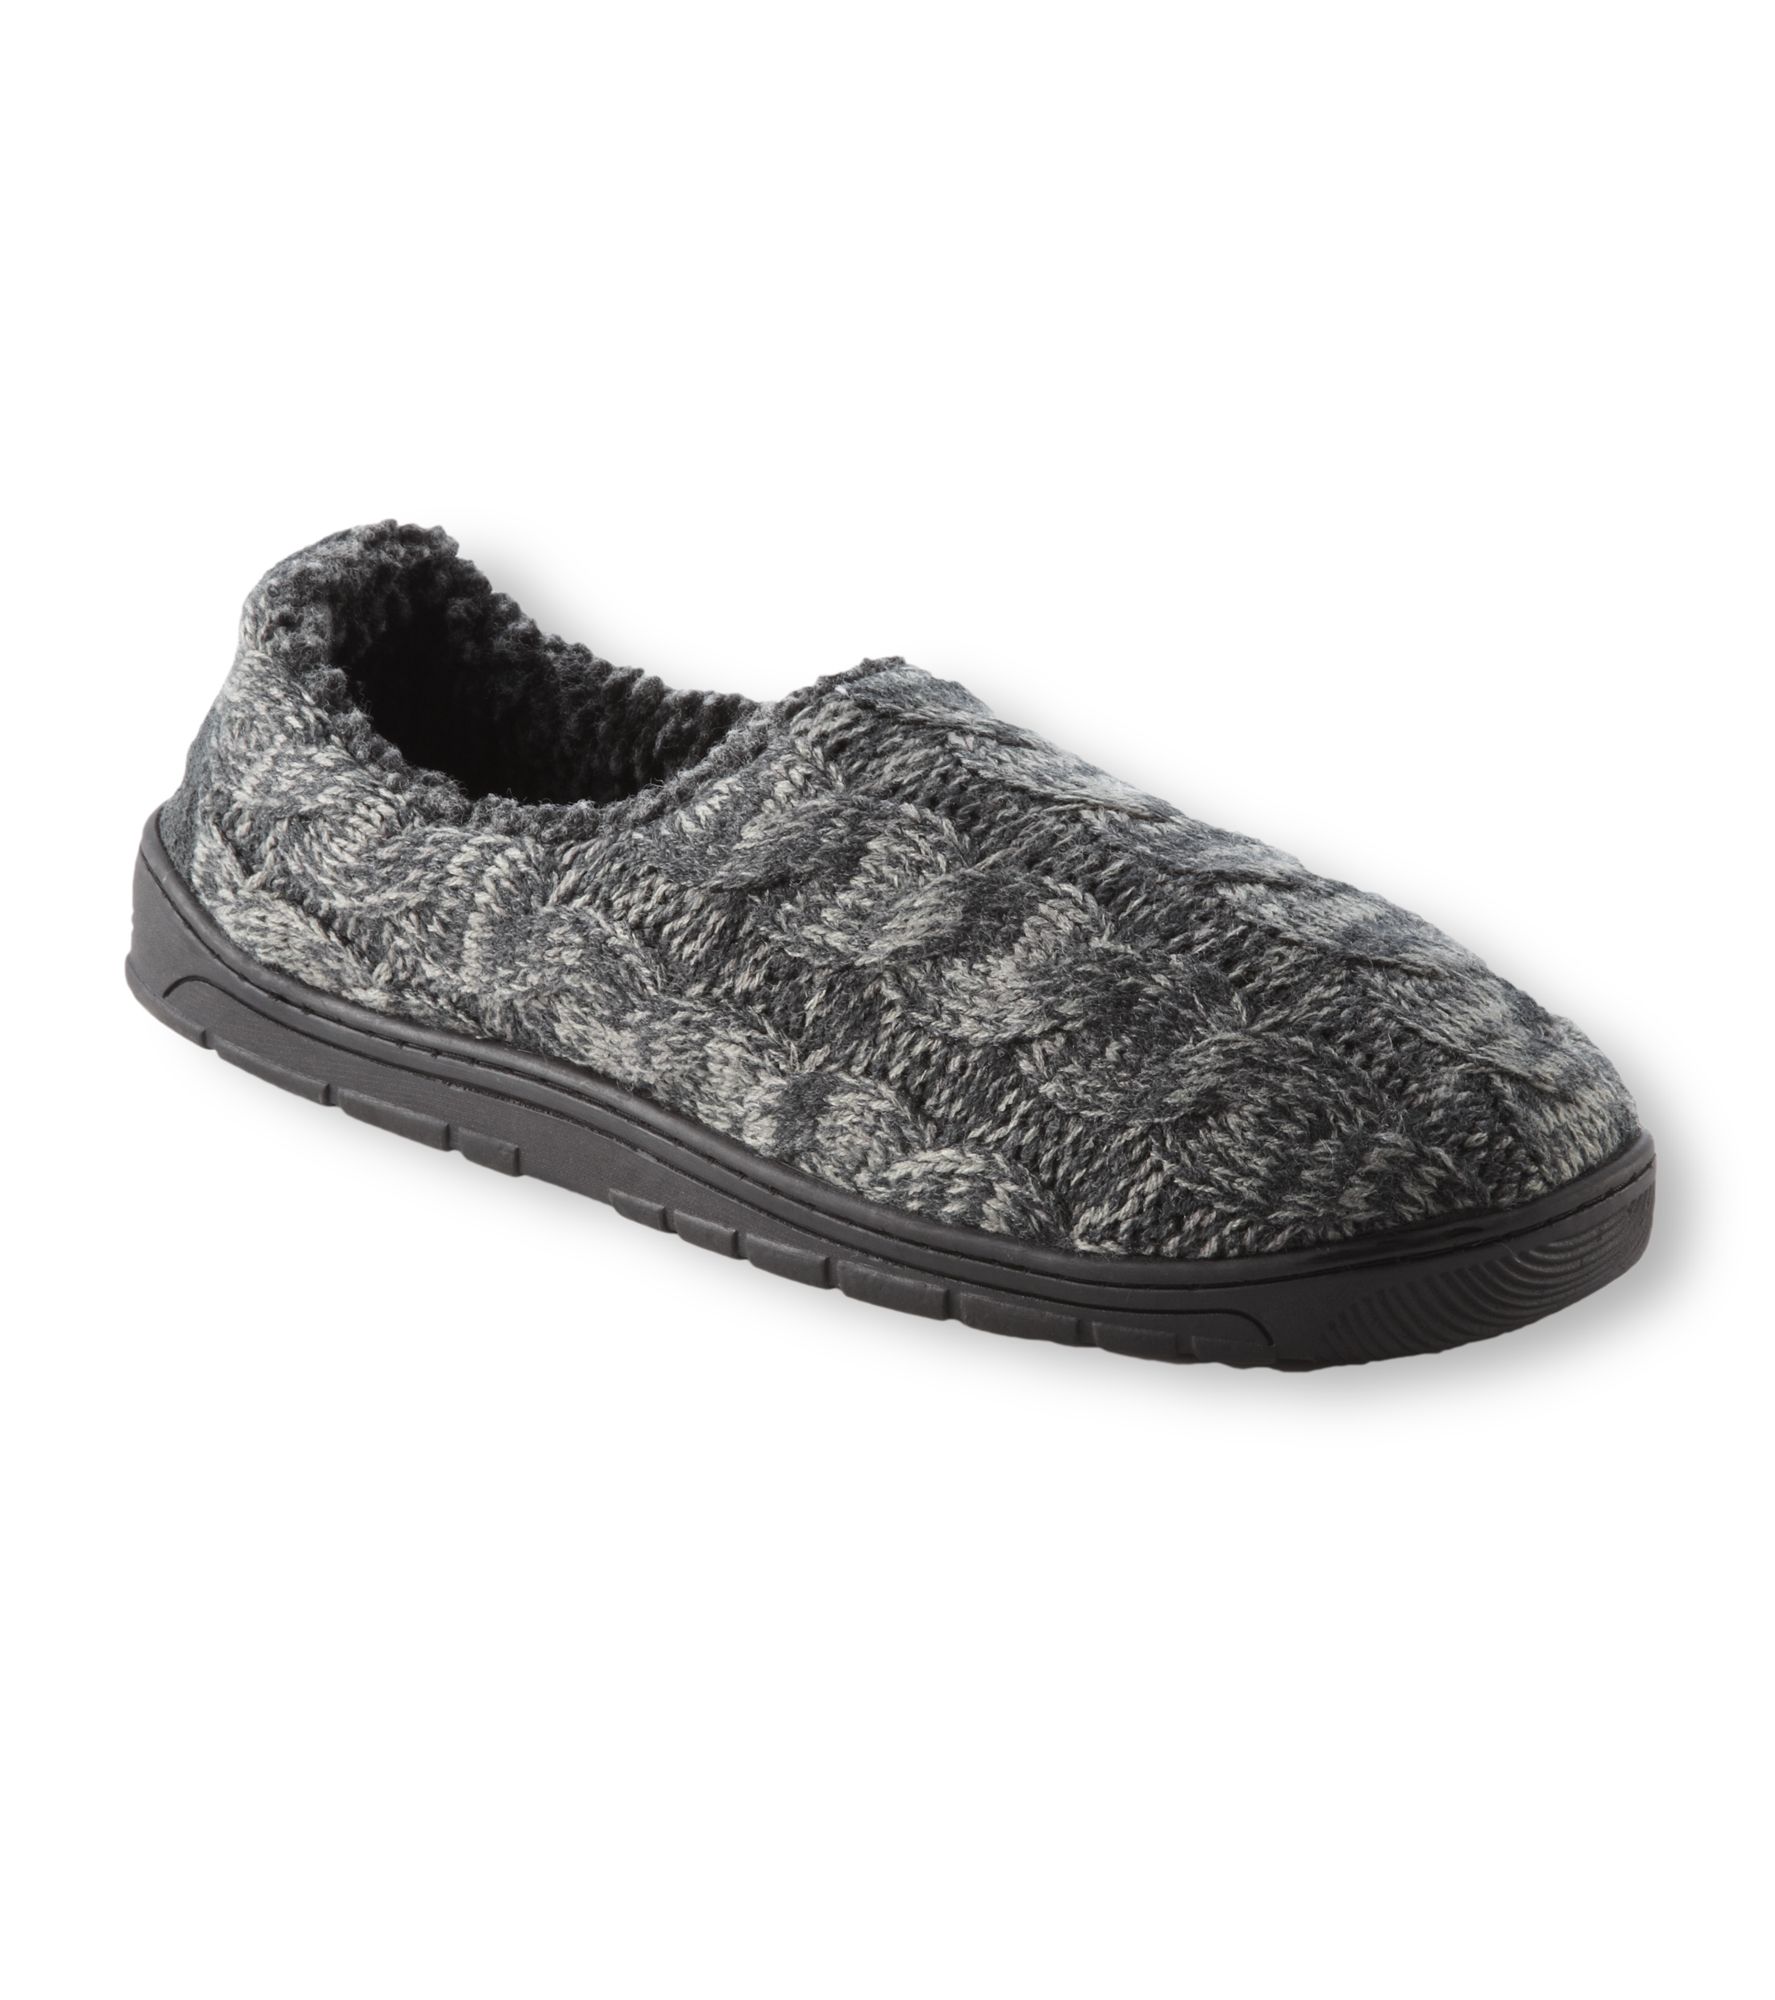 Neal Cable Full Foot Slipper - Charcoal